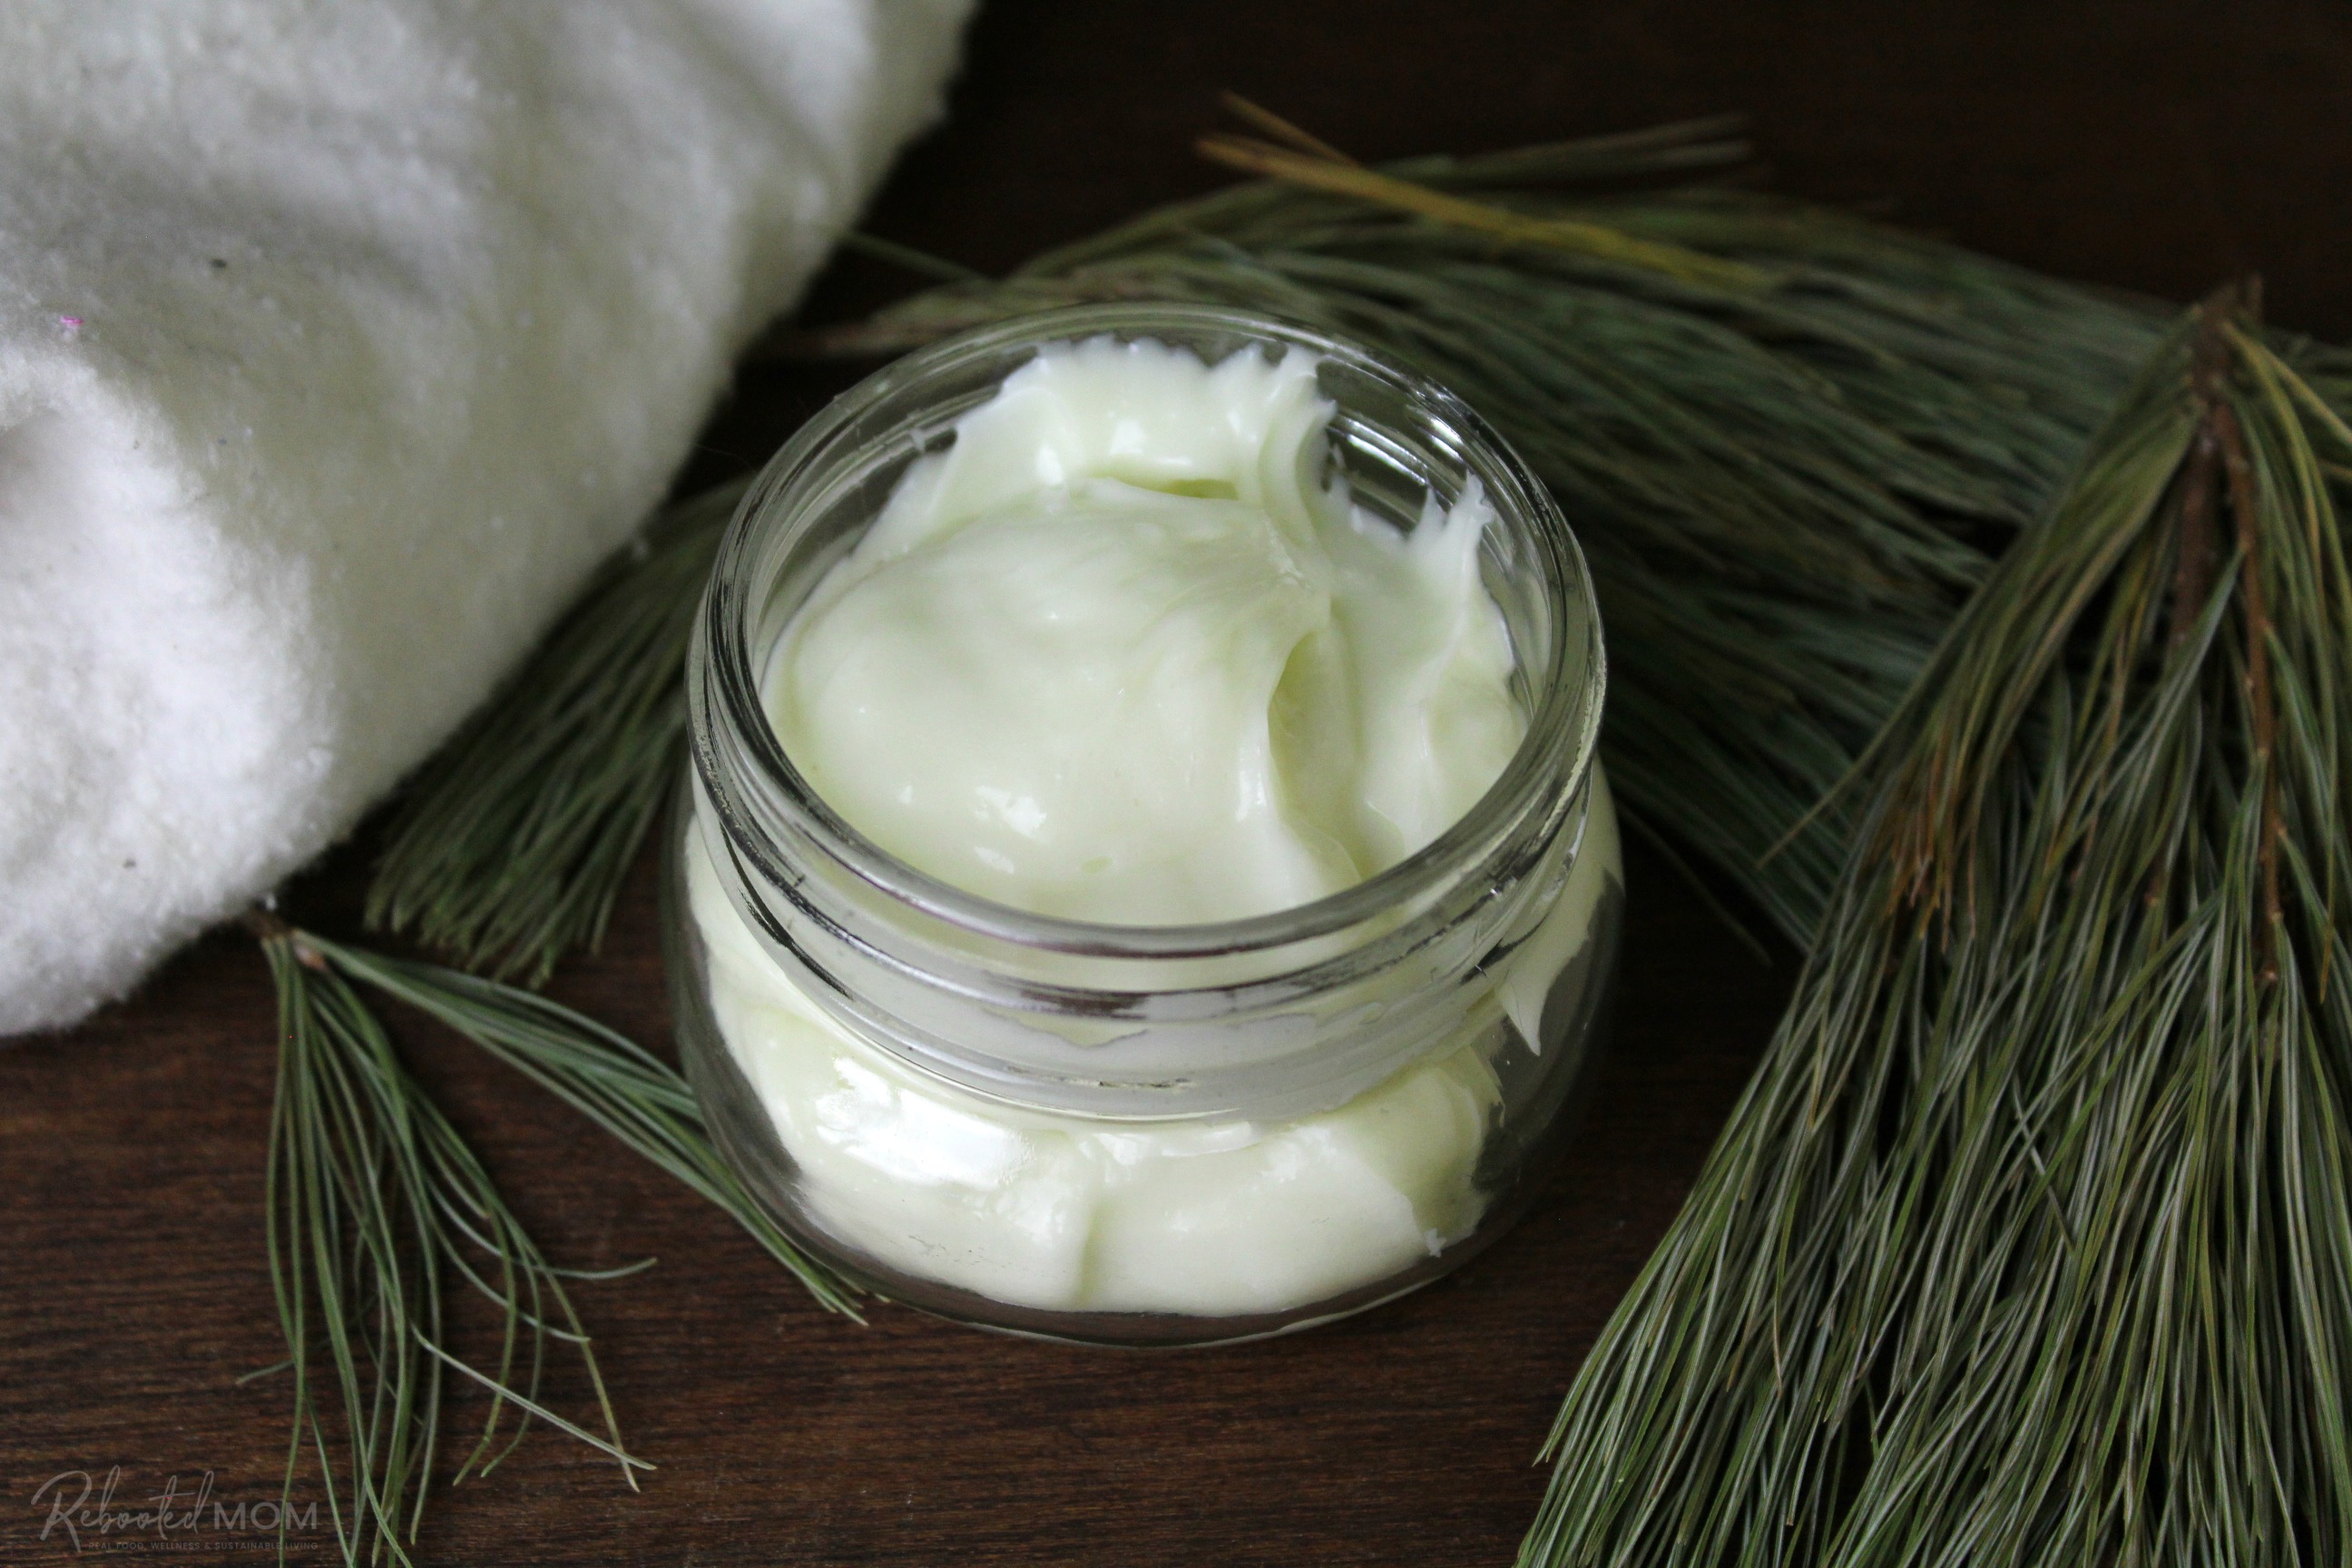 Whipped Pine Body Butter